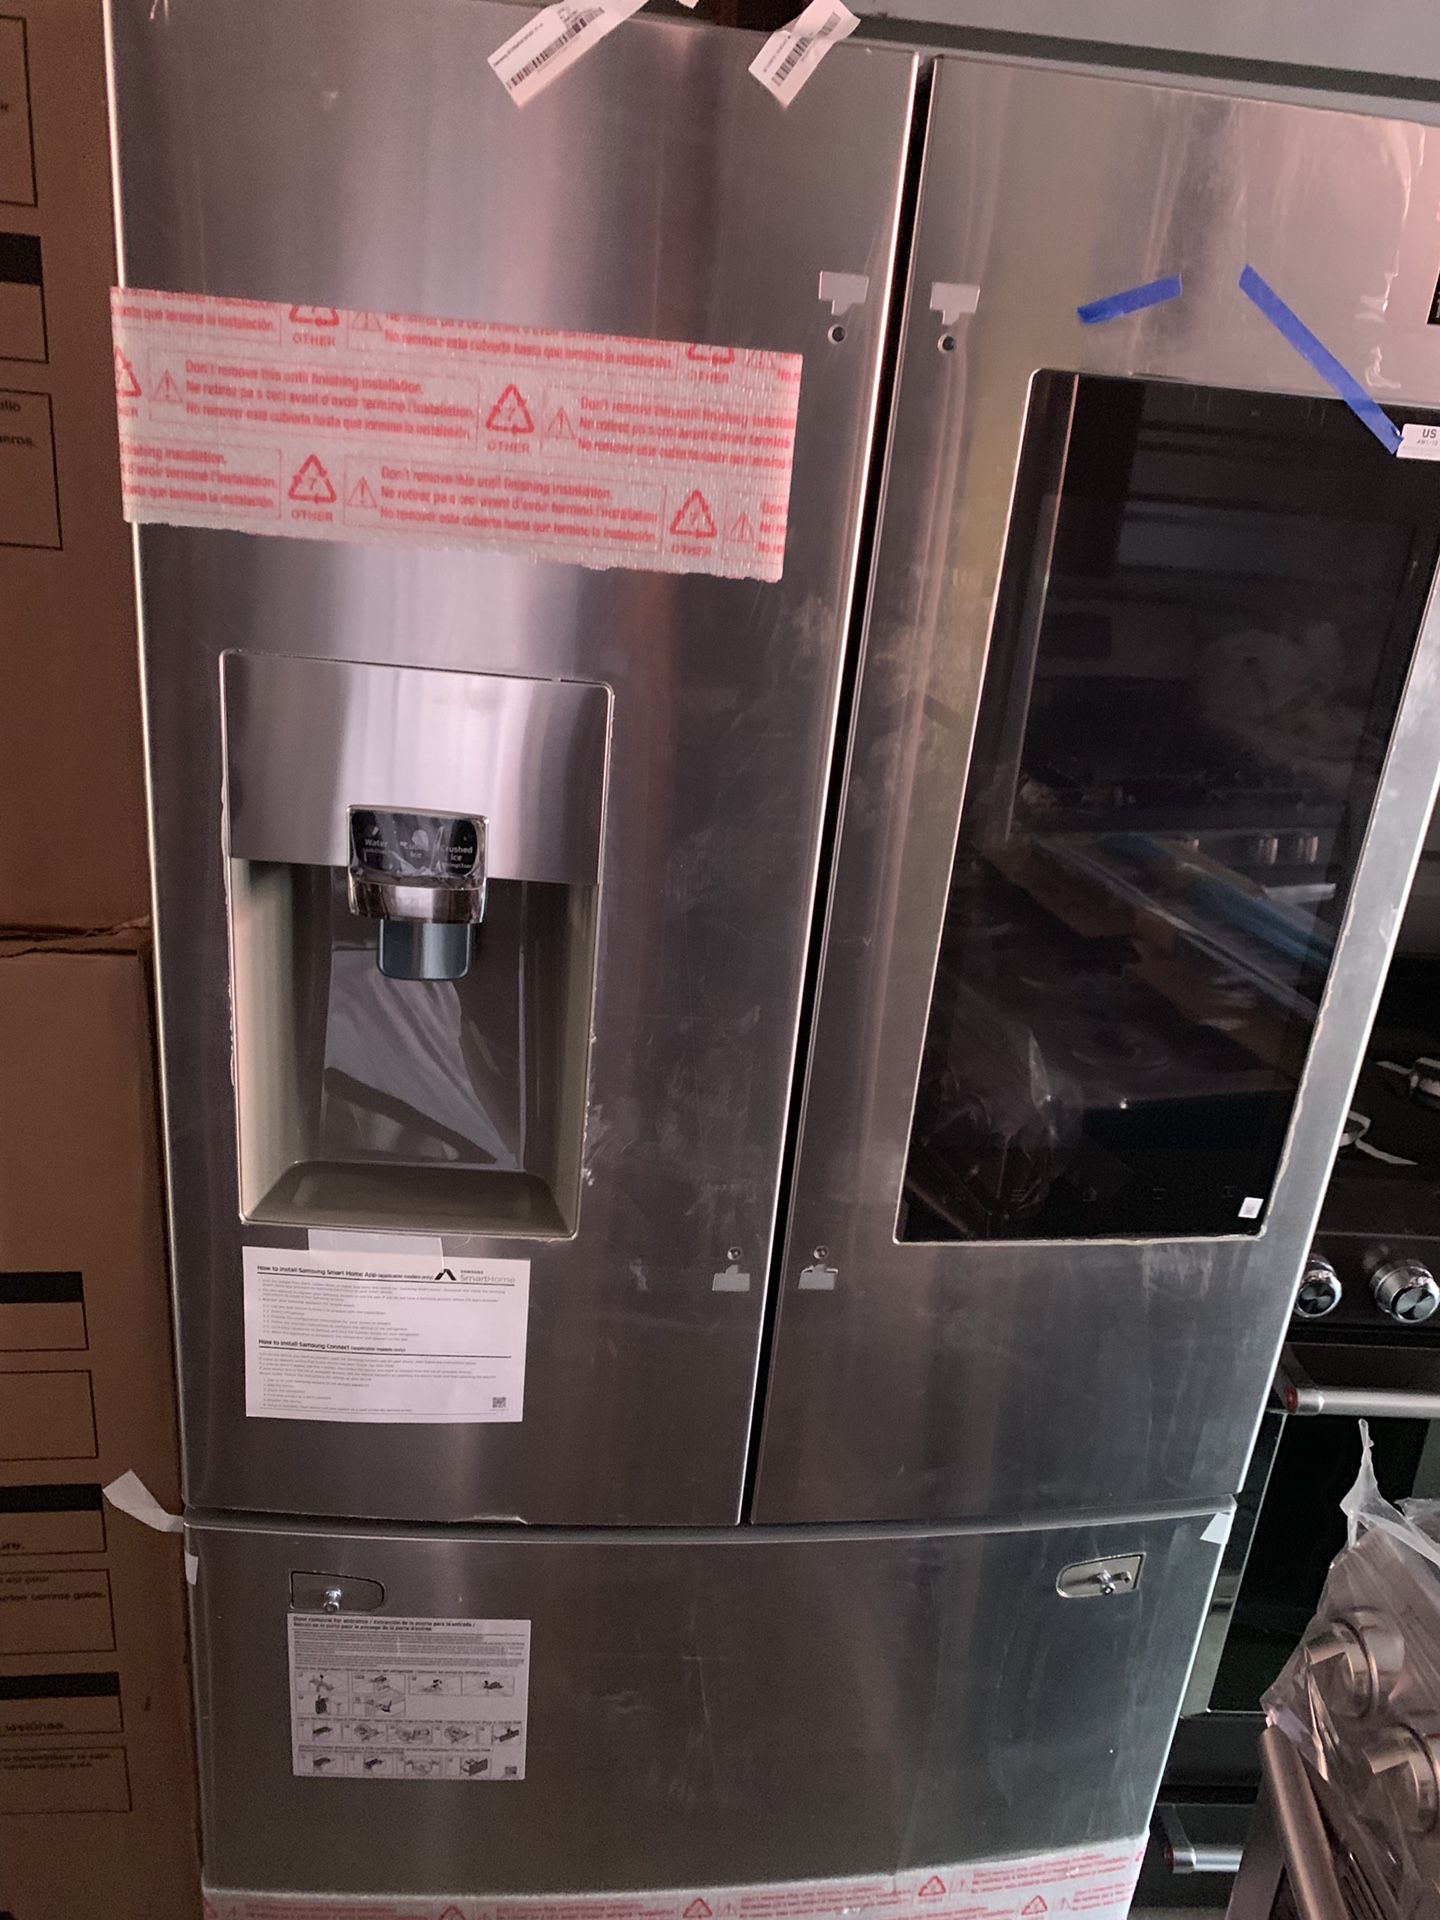 Samsung Refrigerator with built in tv monitor